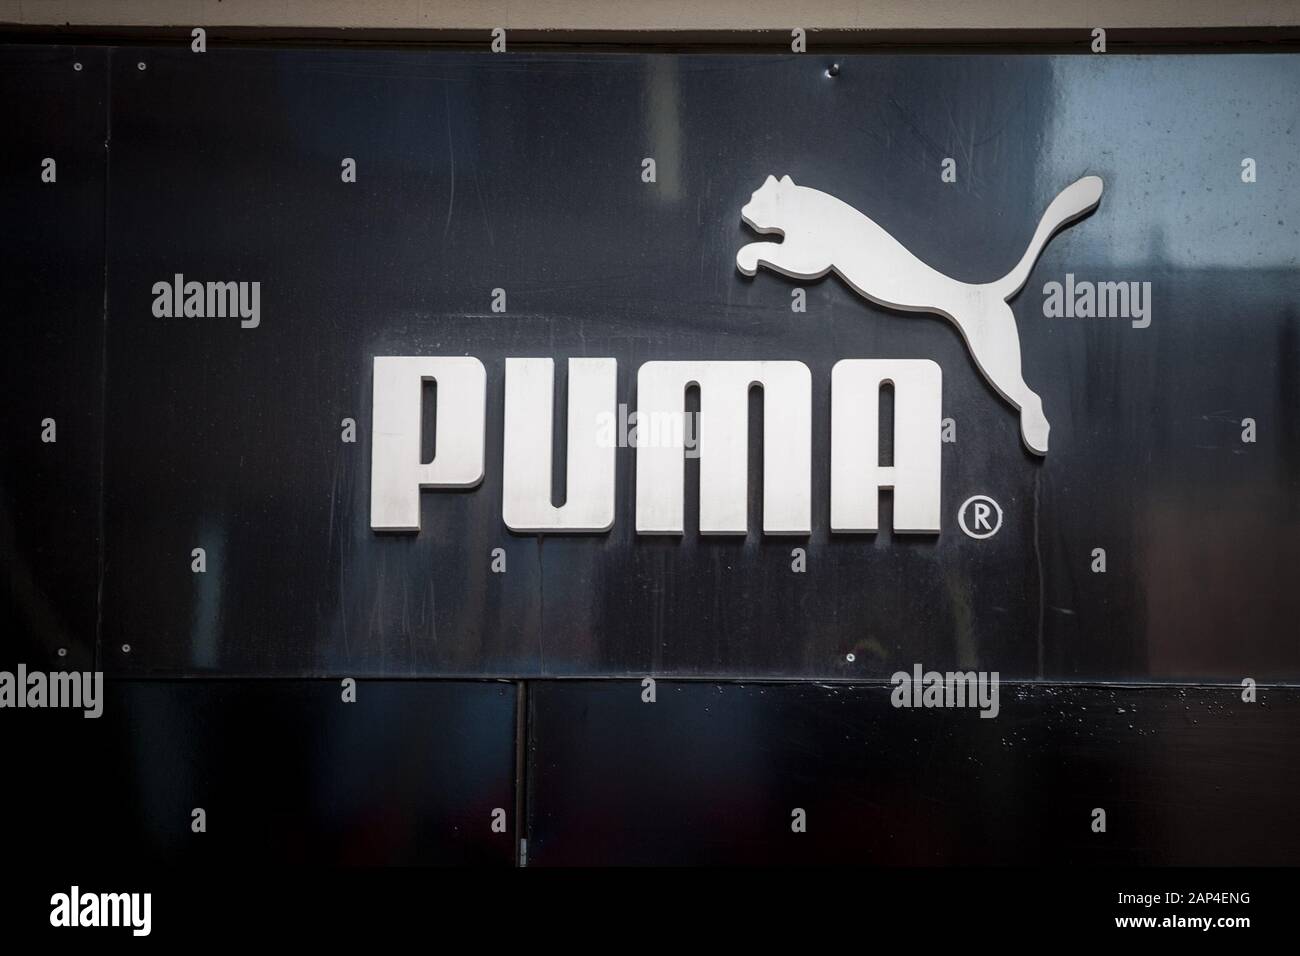 BRNO, CZECHIA - NOVEMBER 4, 2019: Puma logo on their main store for Brno. Puma is a German brand of sports clothing, sportswear and footwear famous fo Stock Photo